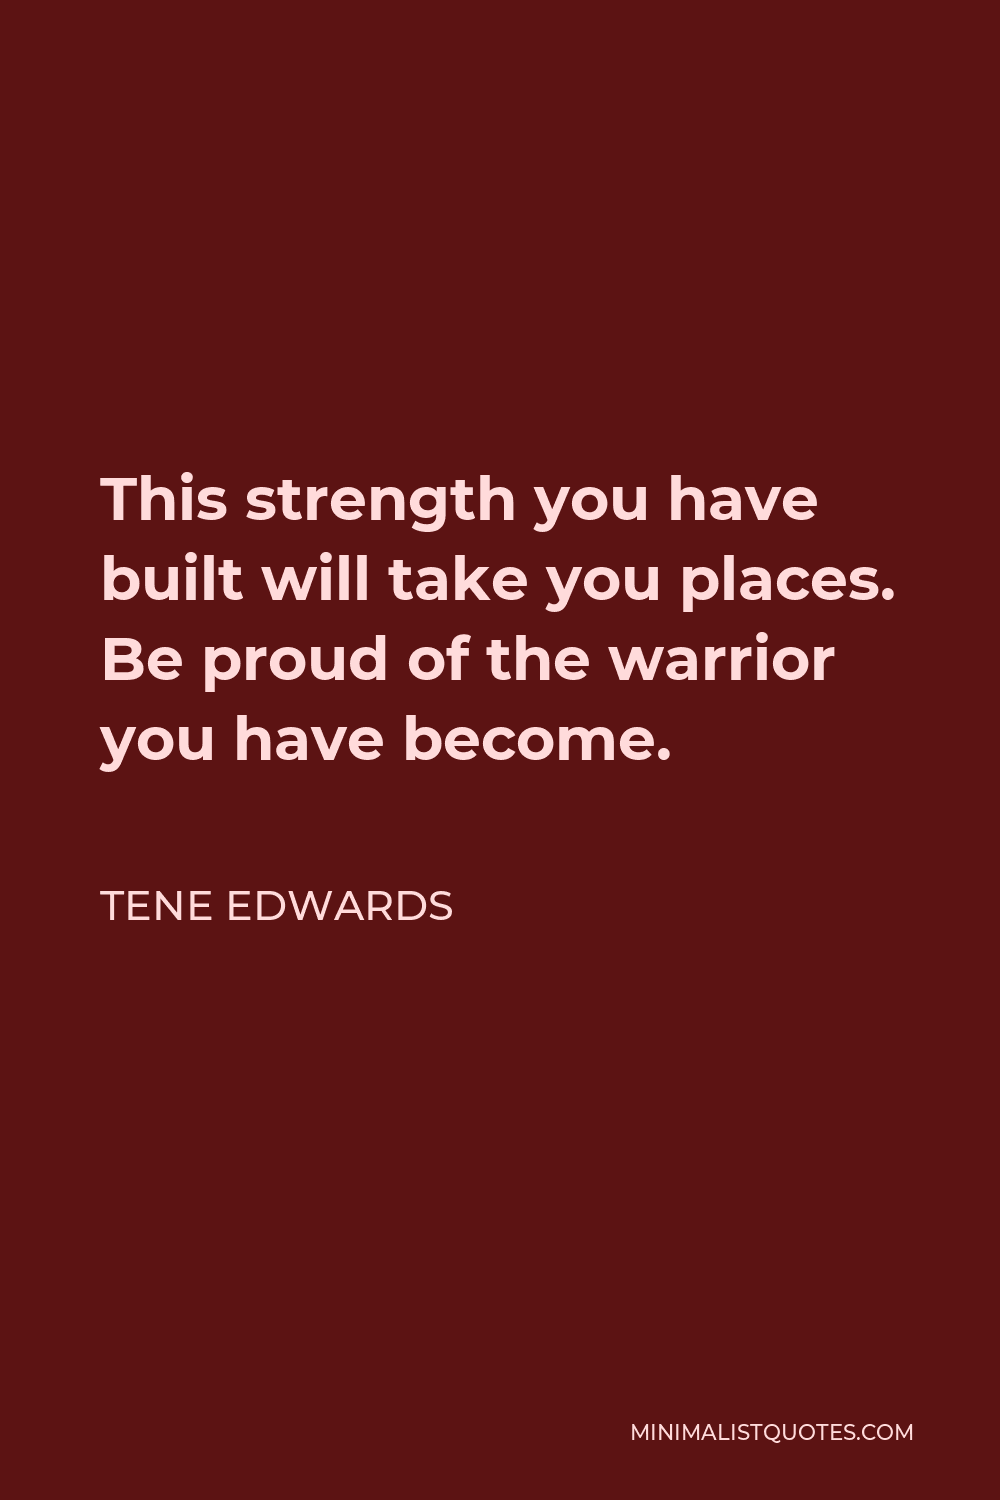 Tene Edwards Quote - This strength you have built will take you places. Be proud of the warrior you have become.